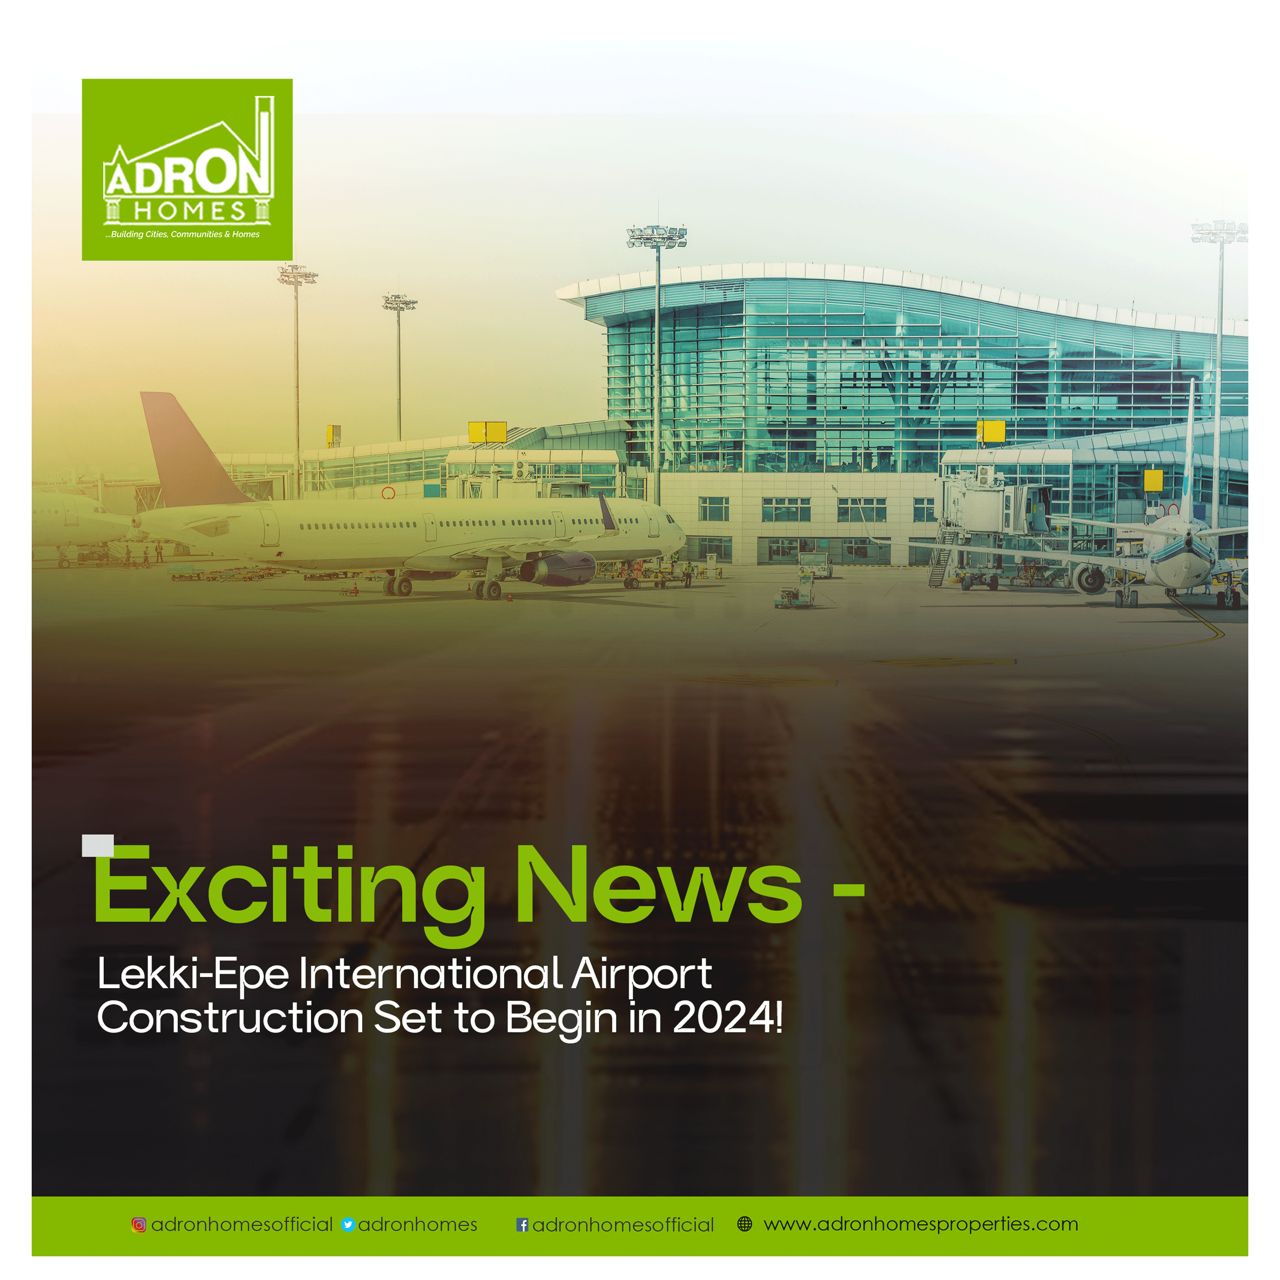 Adron Champions Real Estate Development In Lekki-Epe, Ibeju As LASG Set To Commence Lekki Airport Project